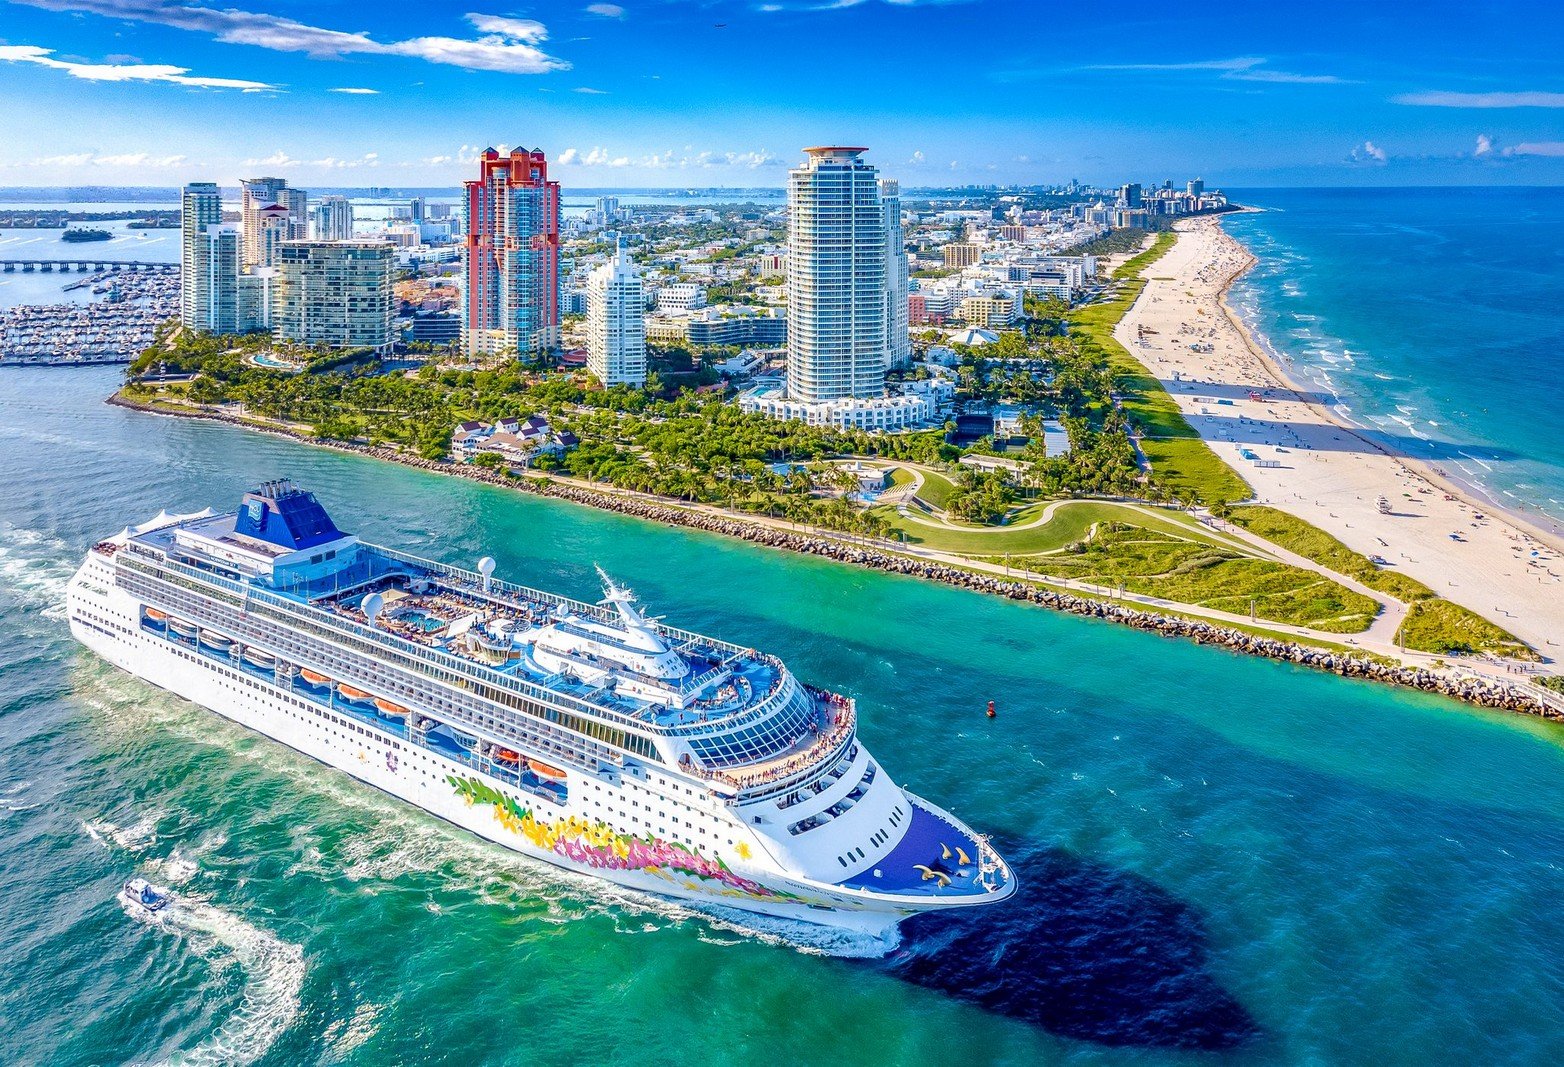 Florida Governor dismisses Norwegian Cruise Line threat to pull cruise ships from Florida | Royal Caribbean Blog